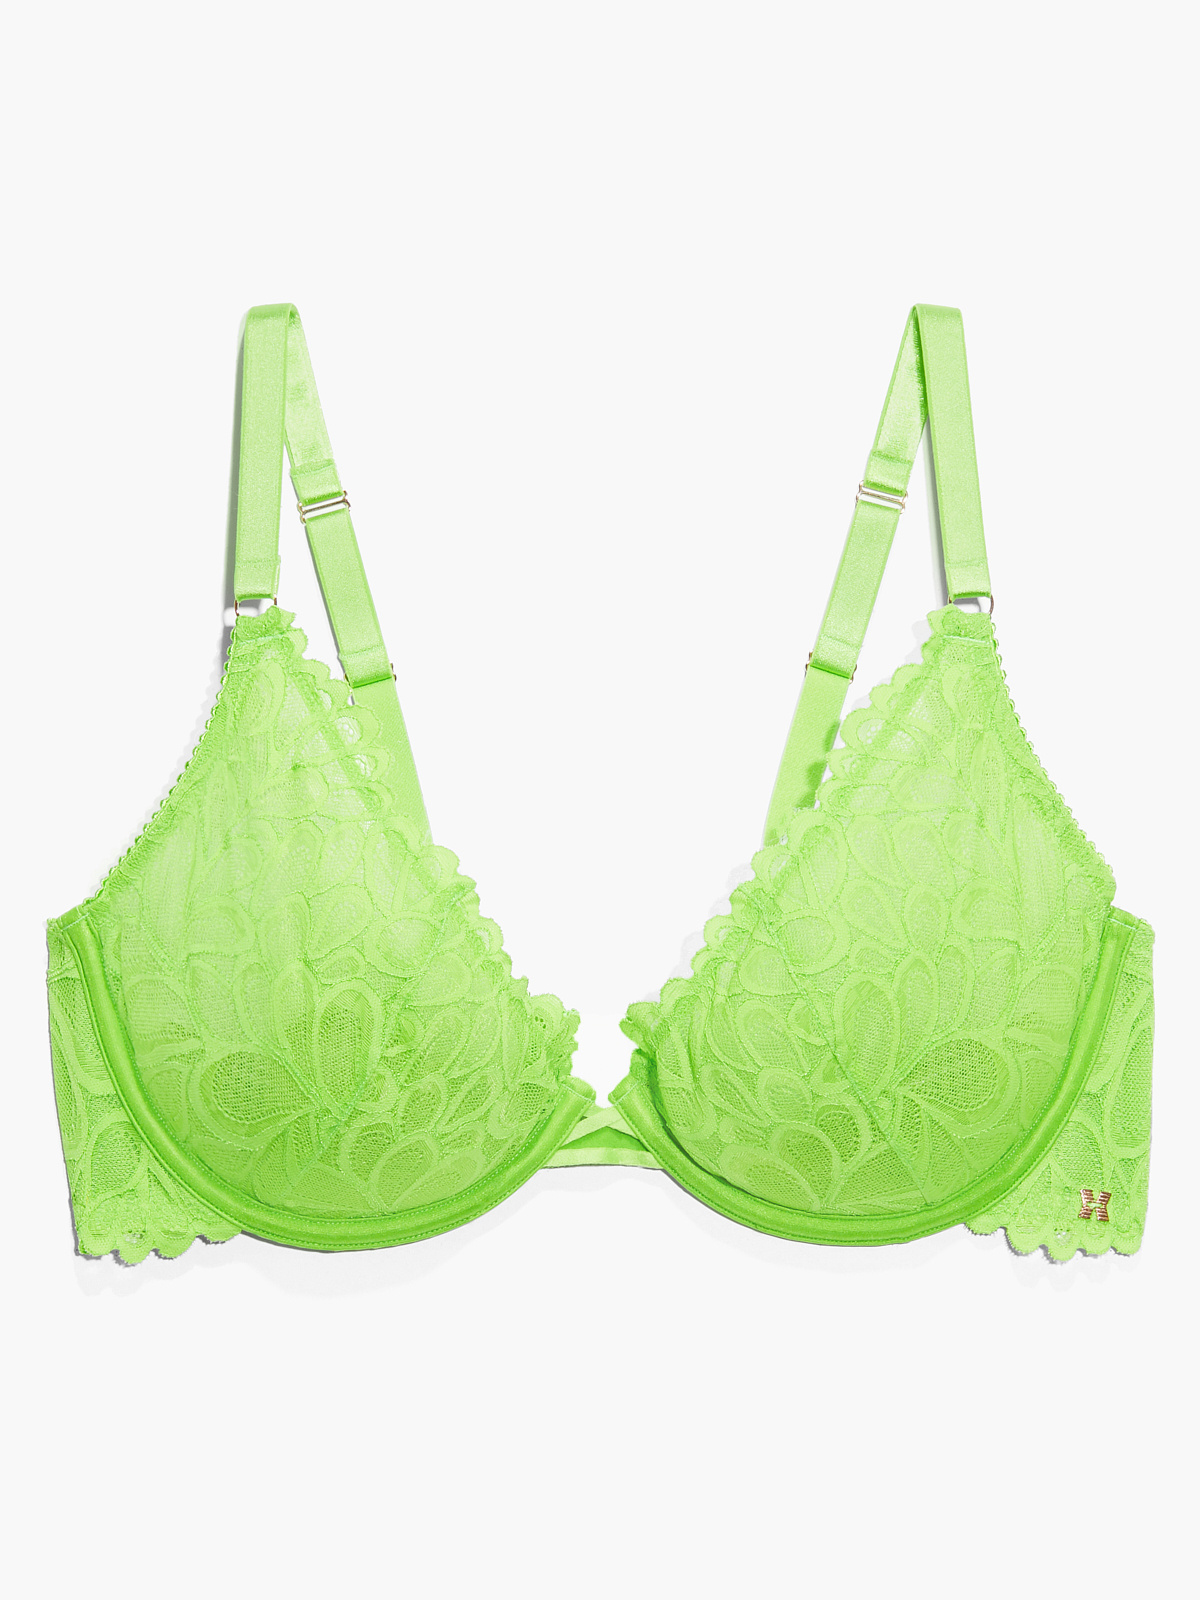 Rihanna Savage x Fenty Lace Olive Green Demi Cup Bra 36A Size undefined -  $35 - From Fried